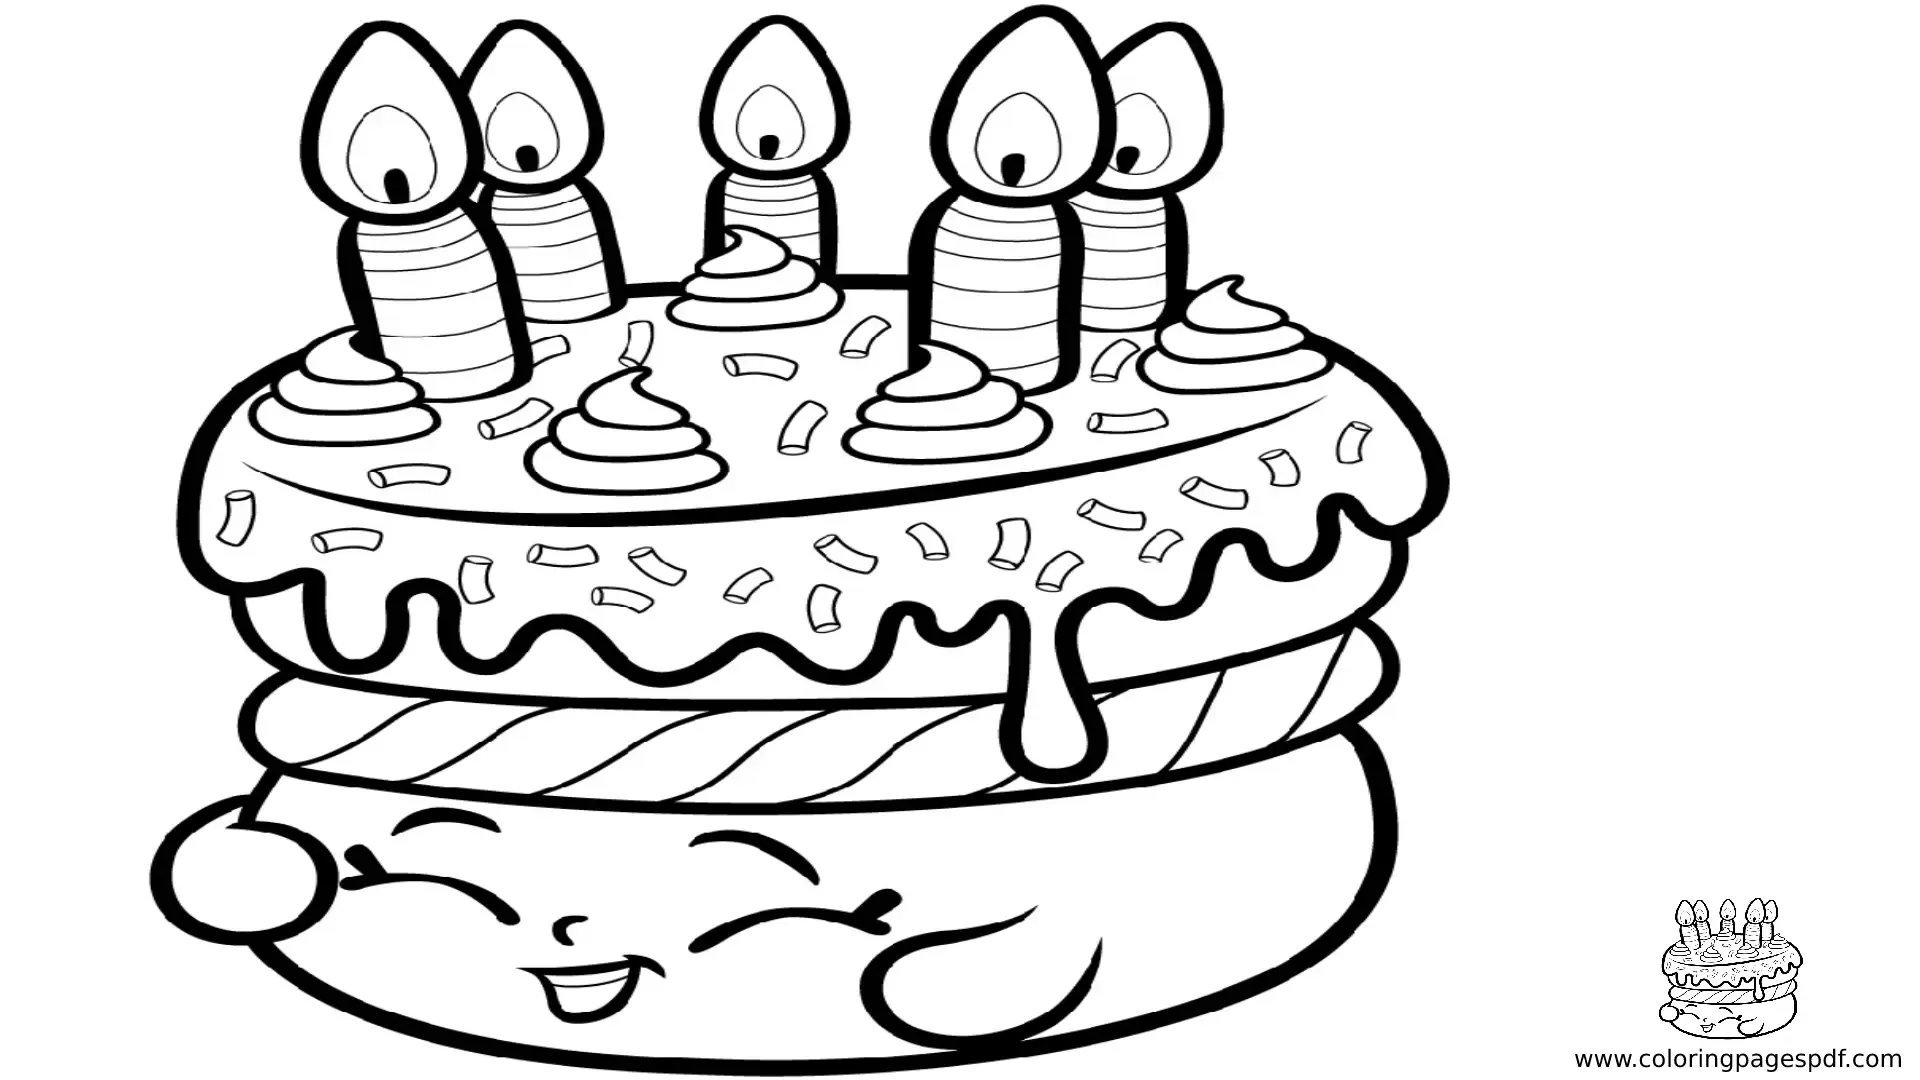 Coloring Pages Of A Birthday Cake With A Happy Face